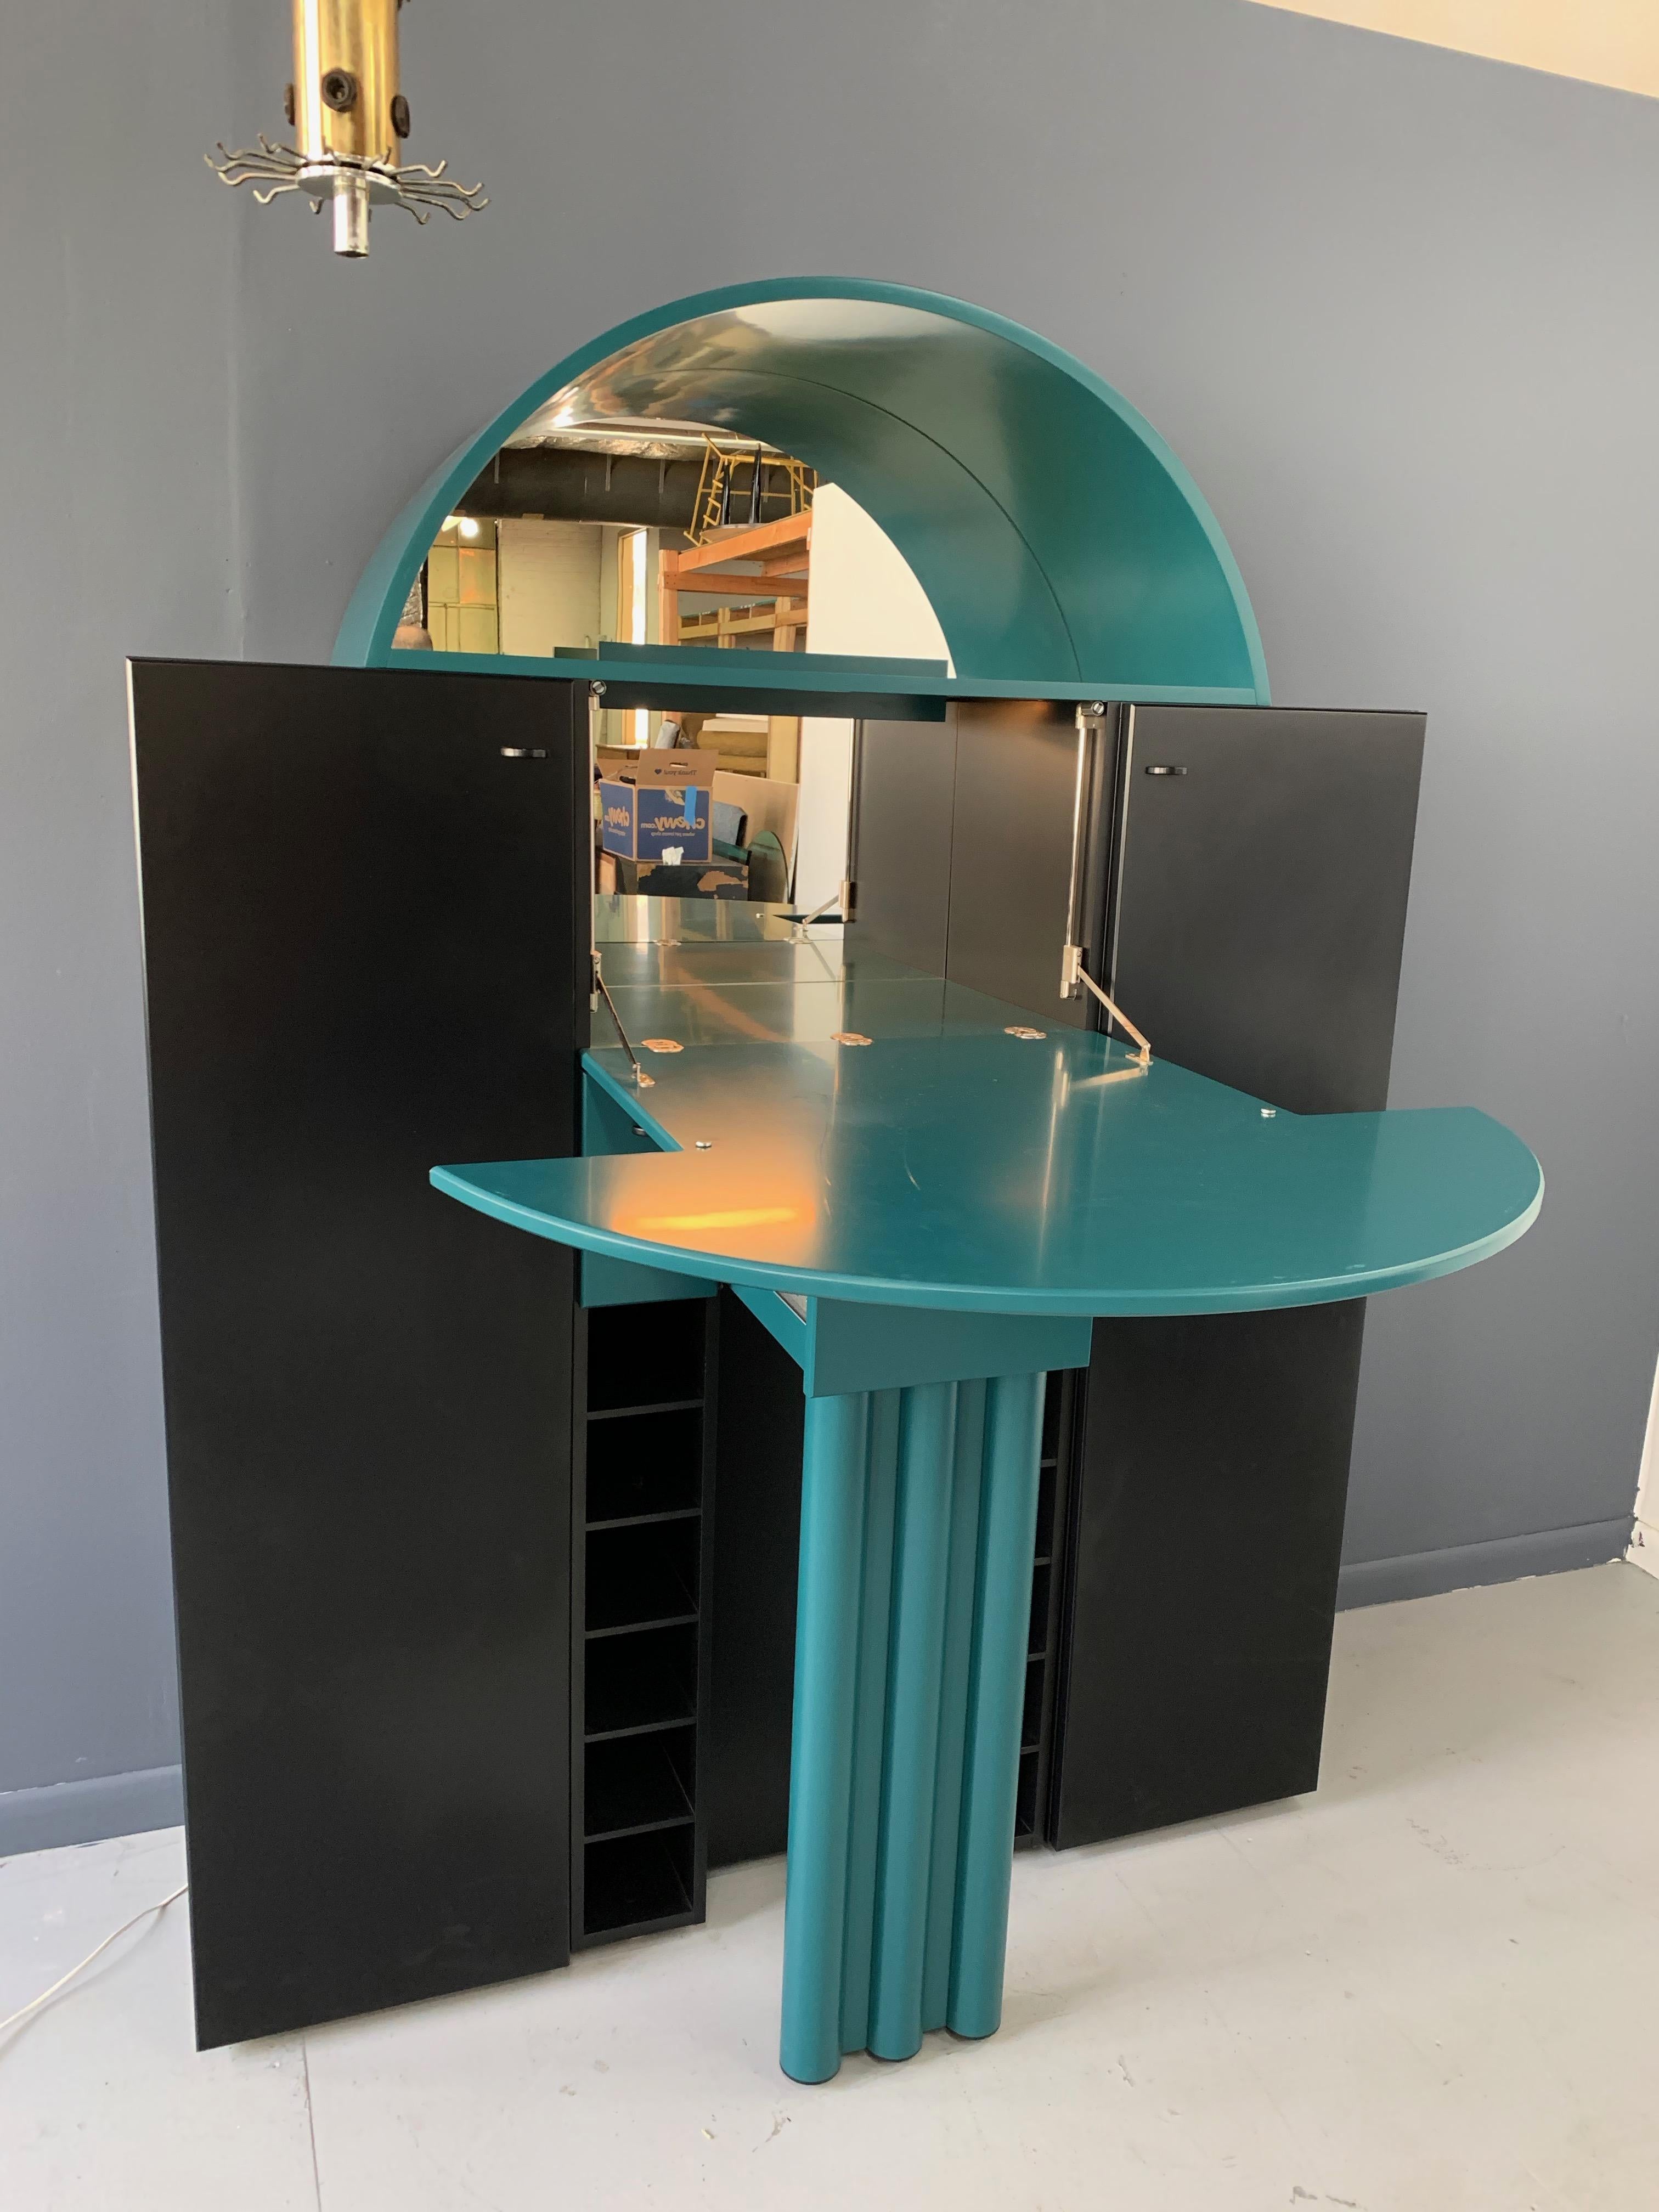 Postmodern bar from German Manufacturer Interlübke, produced in the 1970s.

Arched center door folds down to reveal a lighted mirrored space to hold bottles and glasses. There are also many drawers and spaces to keep bar accoutrement.